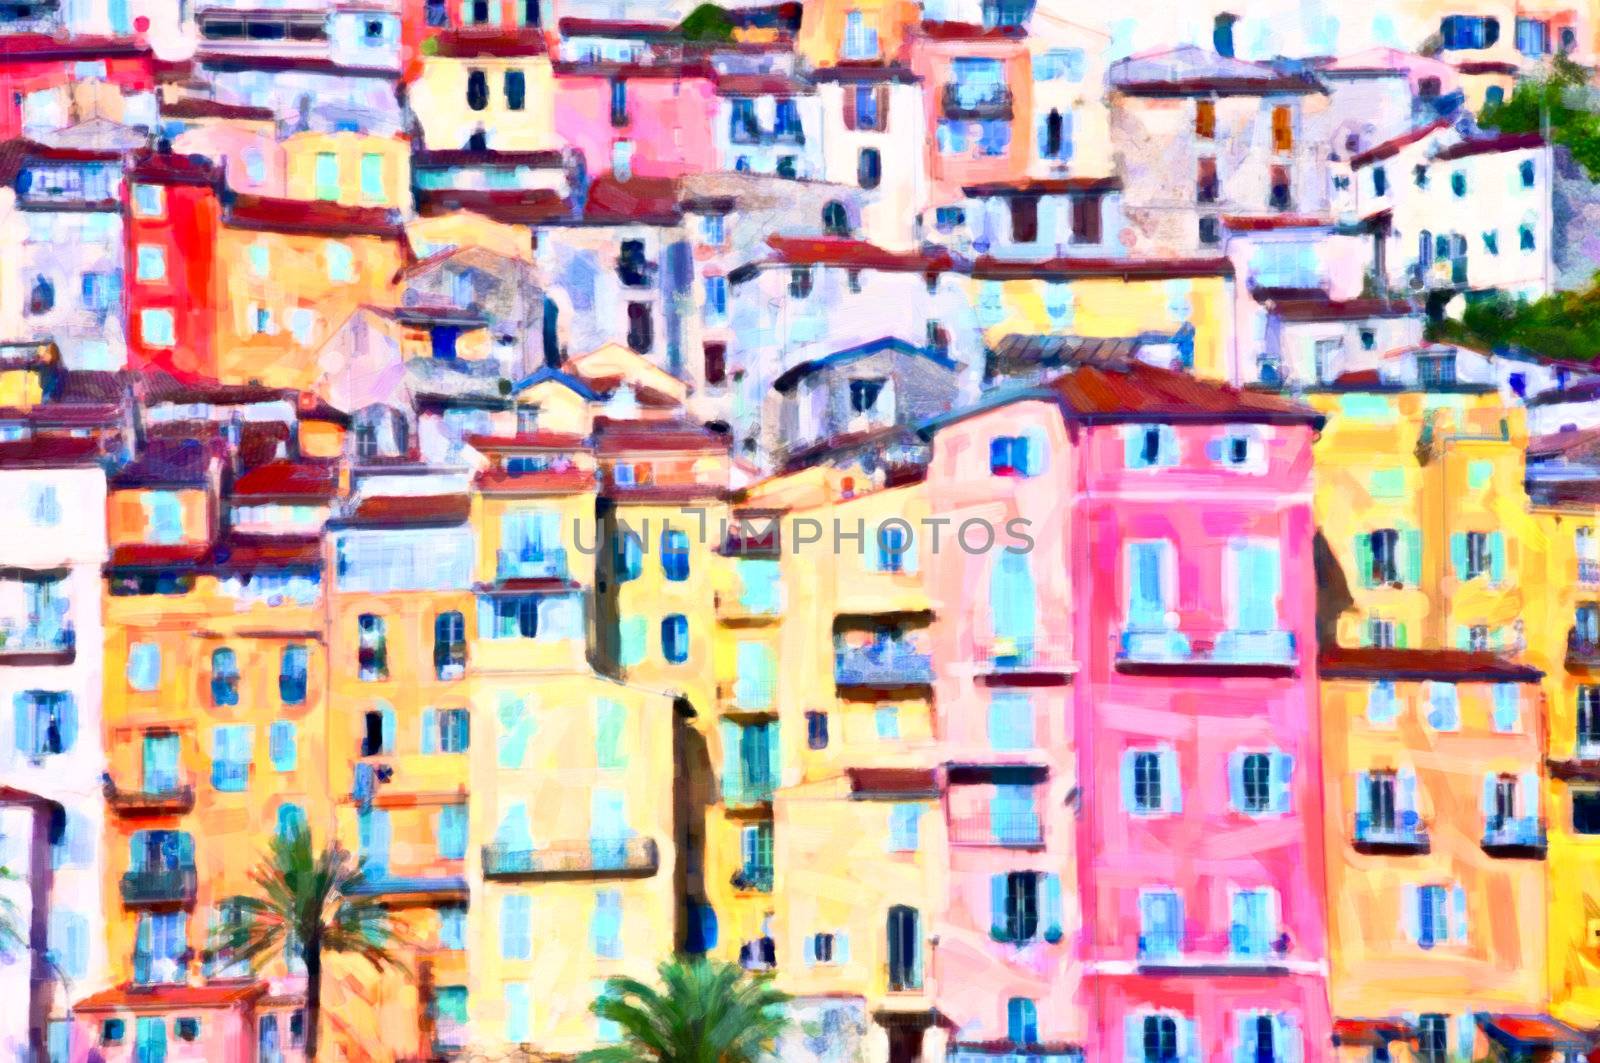 Menton colorful houses, postprocess painting art by martinm303